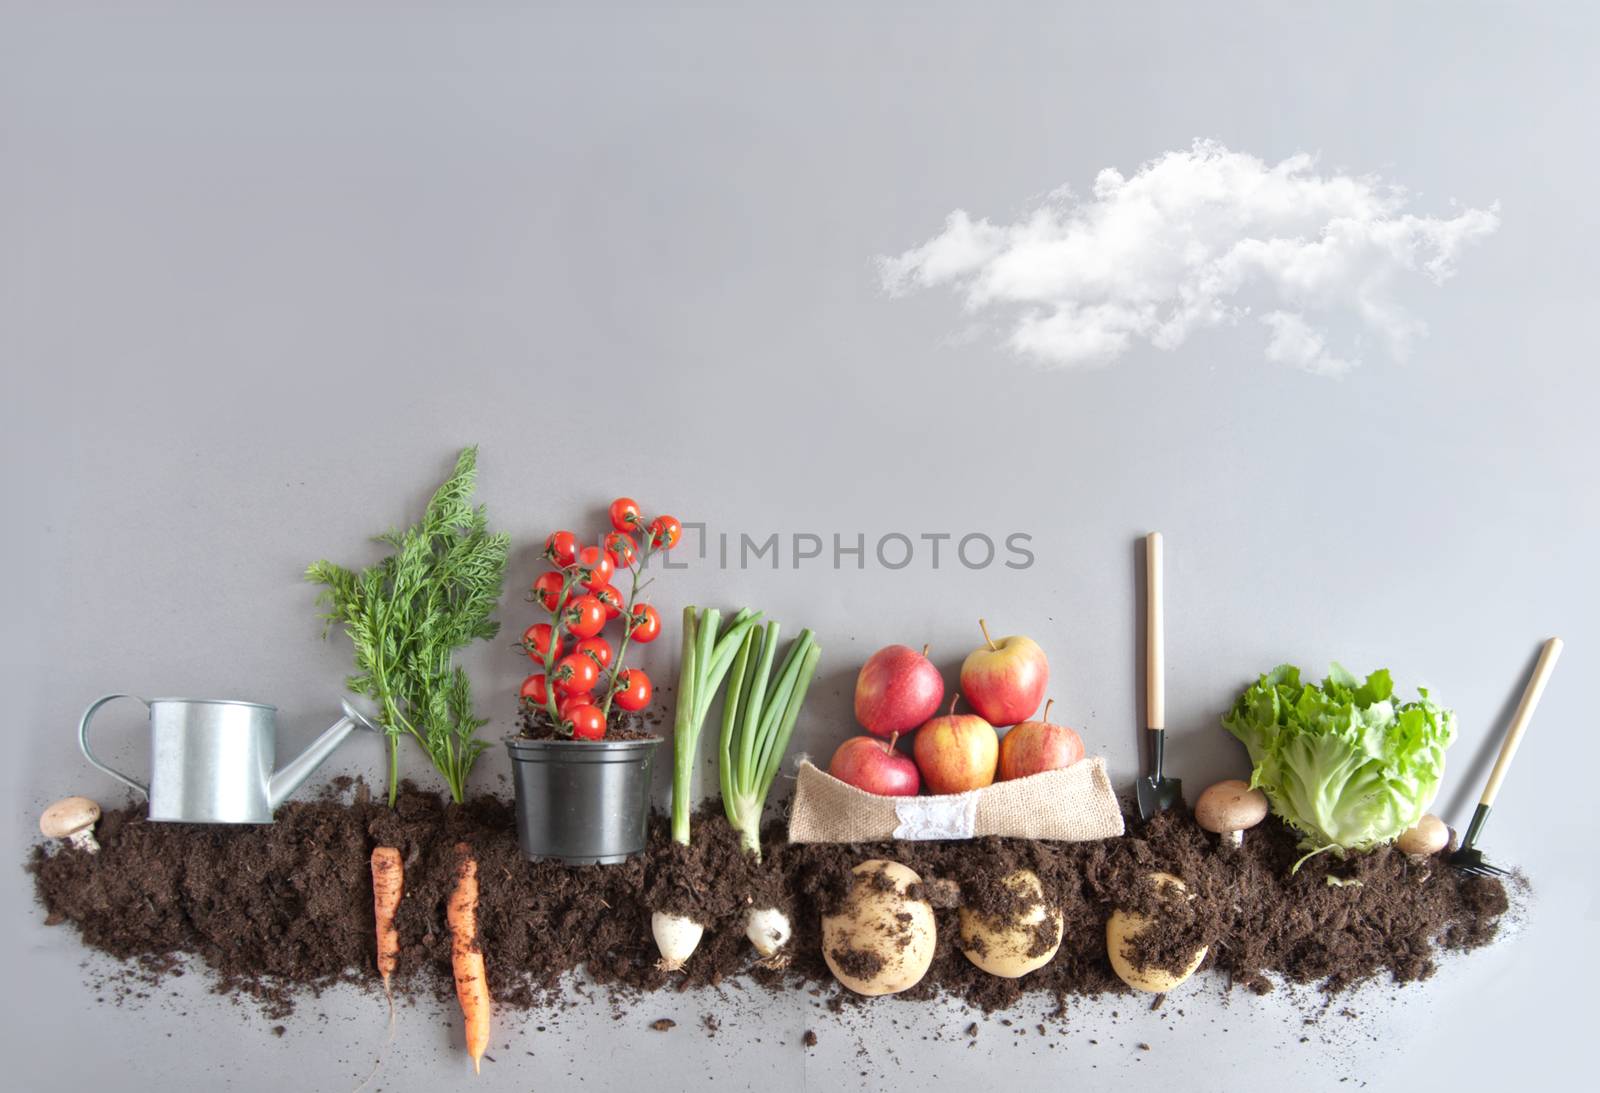 Organic fruit and vegtable garden background by unikpix